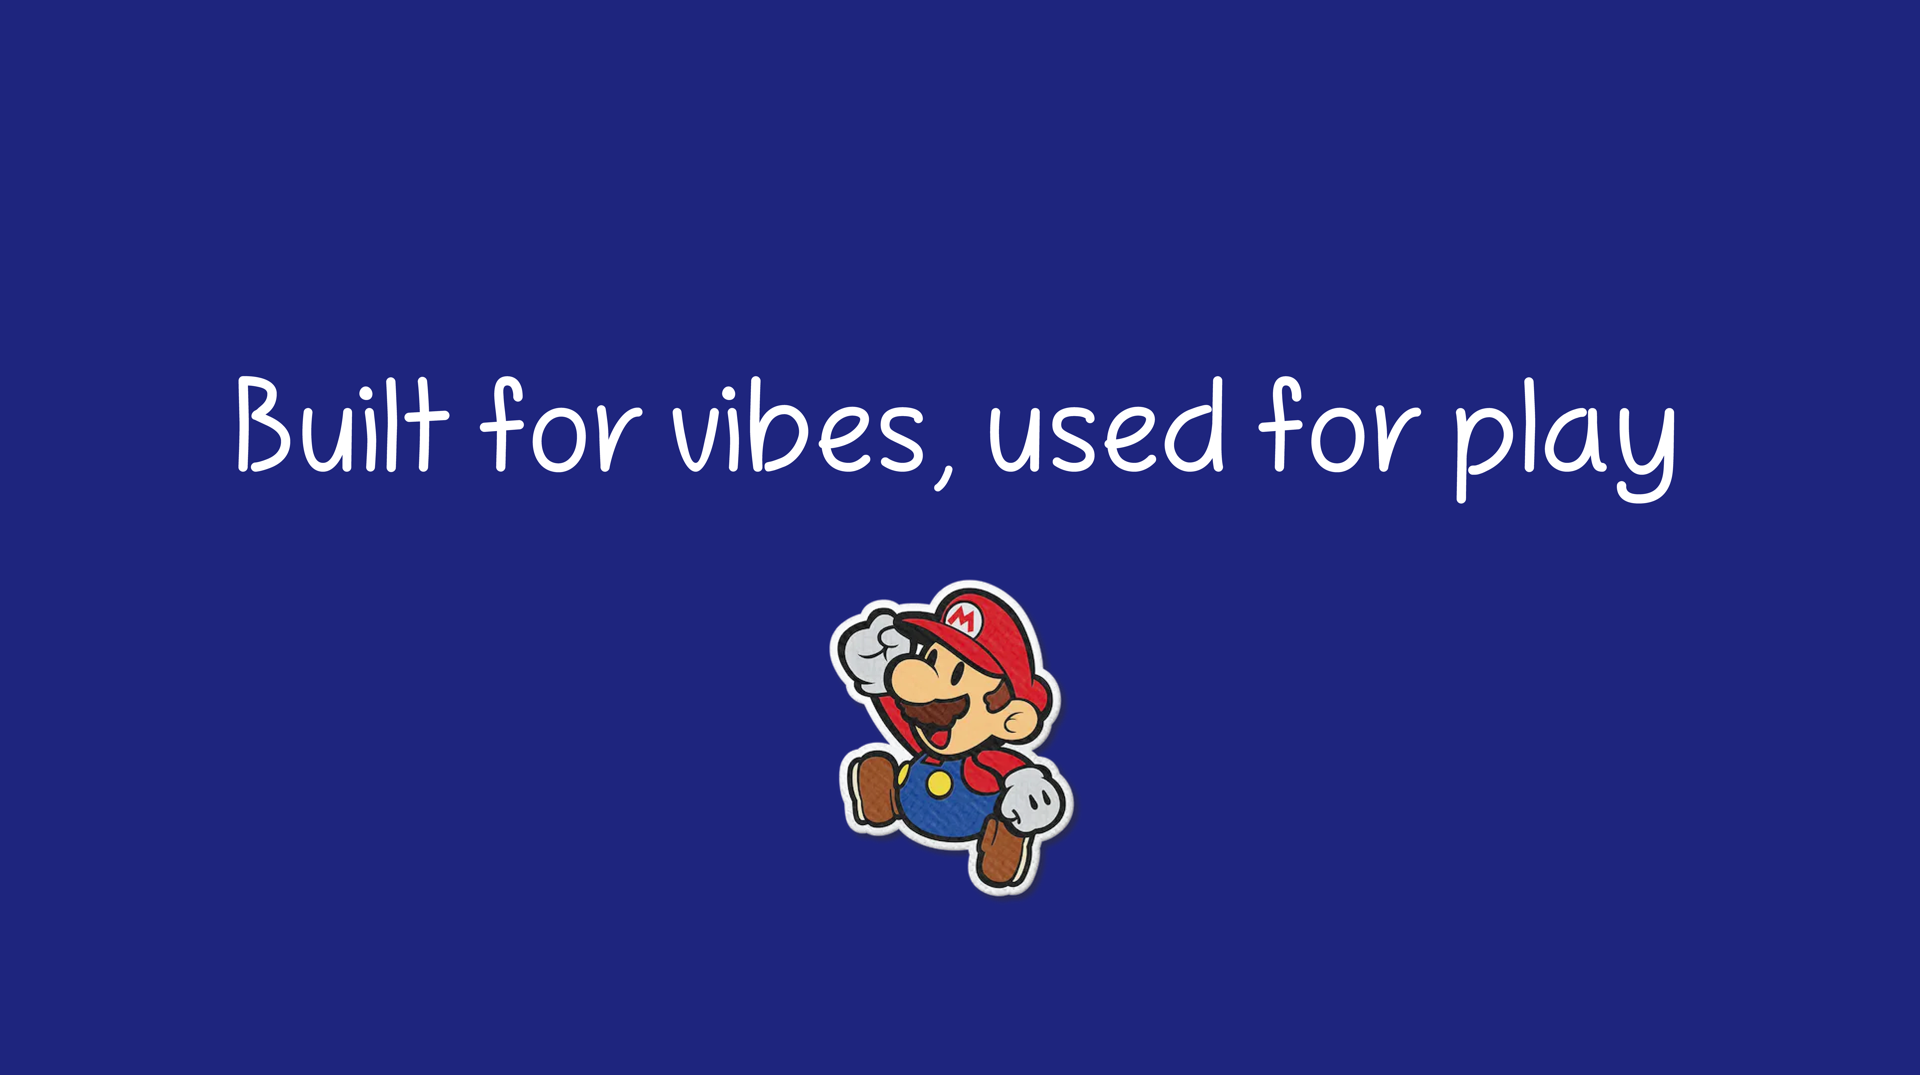 A screencap that says "Built for vibes. Used for play" with paper mario on it.